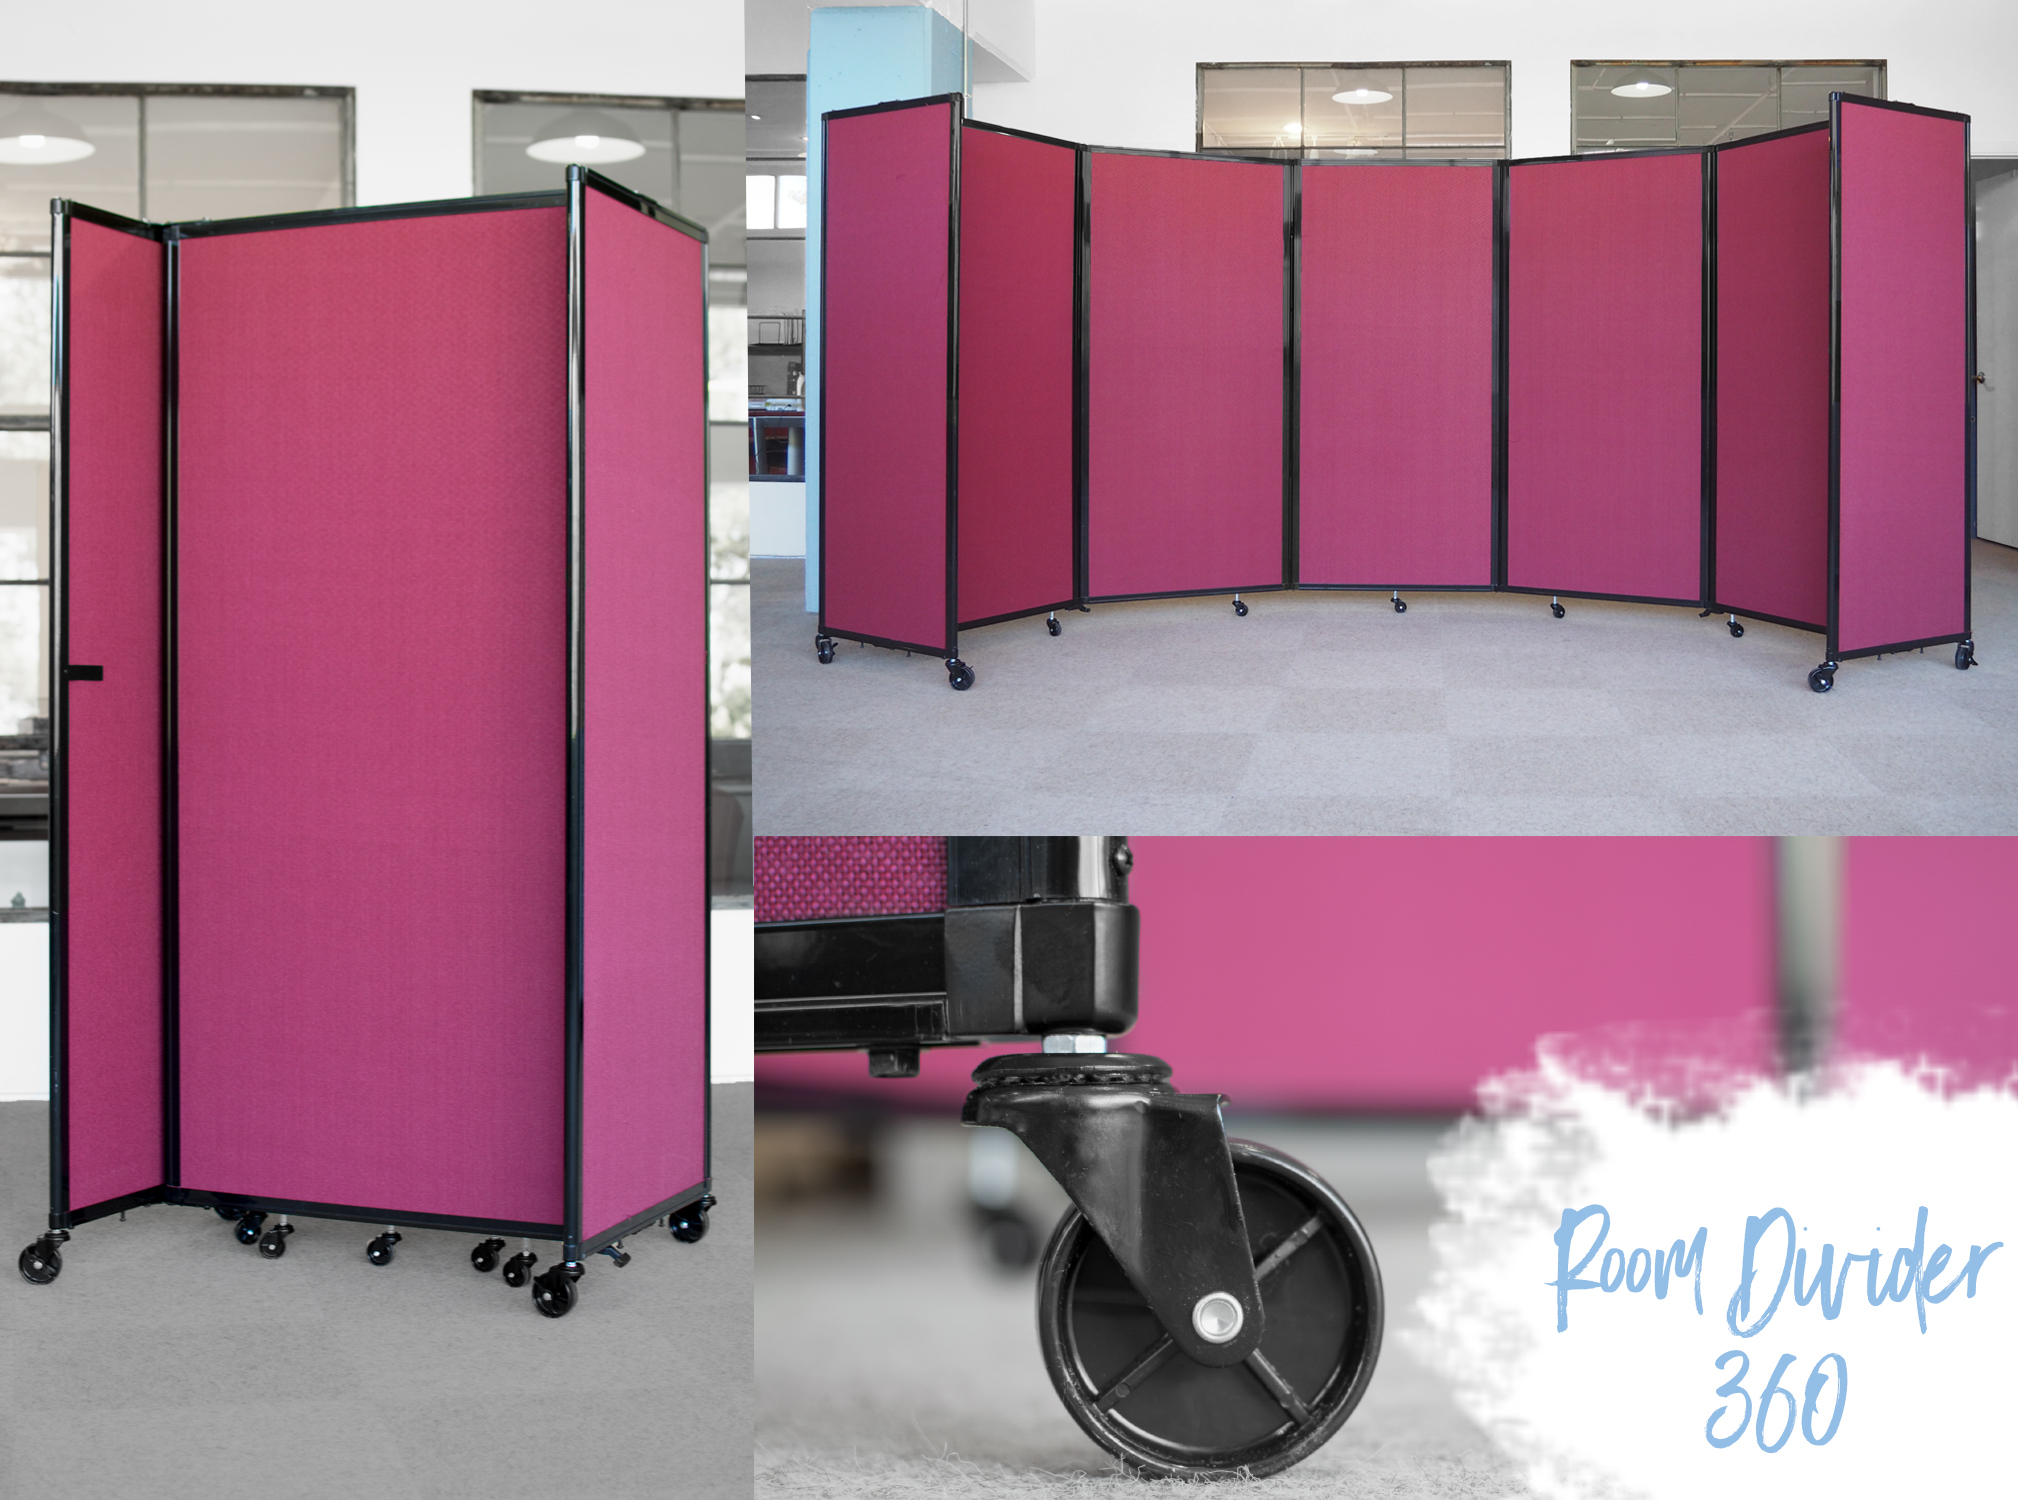 Versare's Room Divider 360 allows a variety of configurations